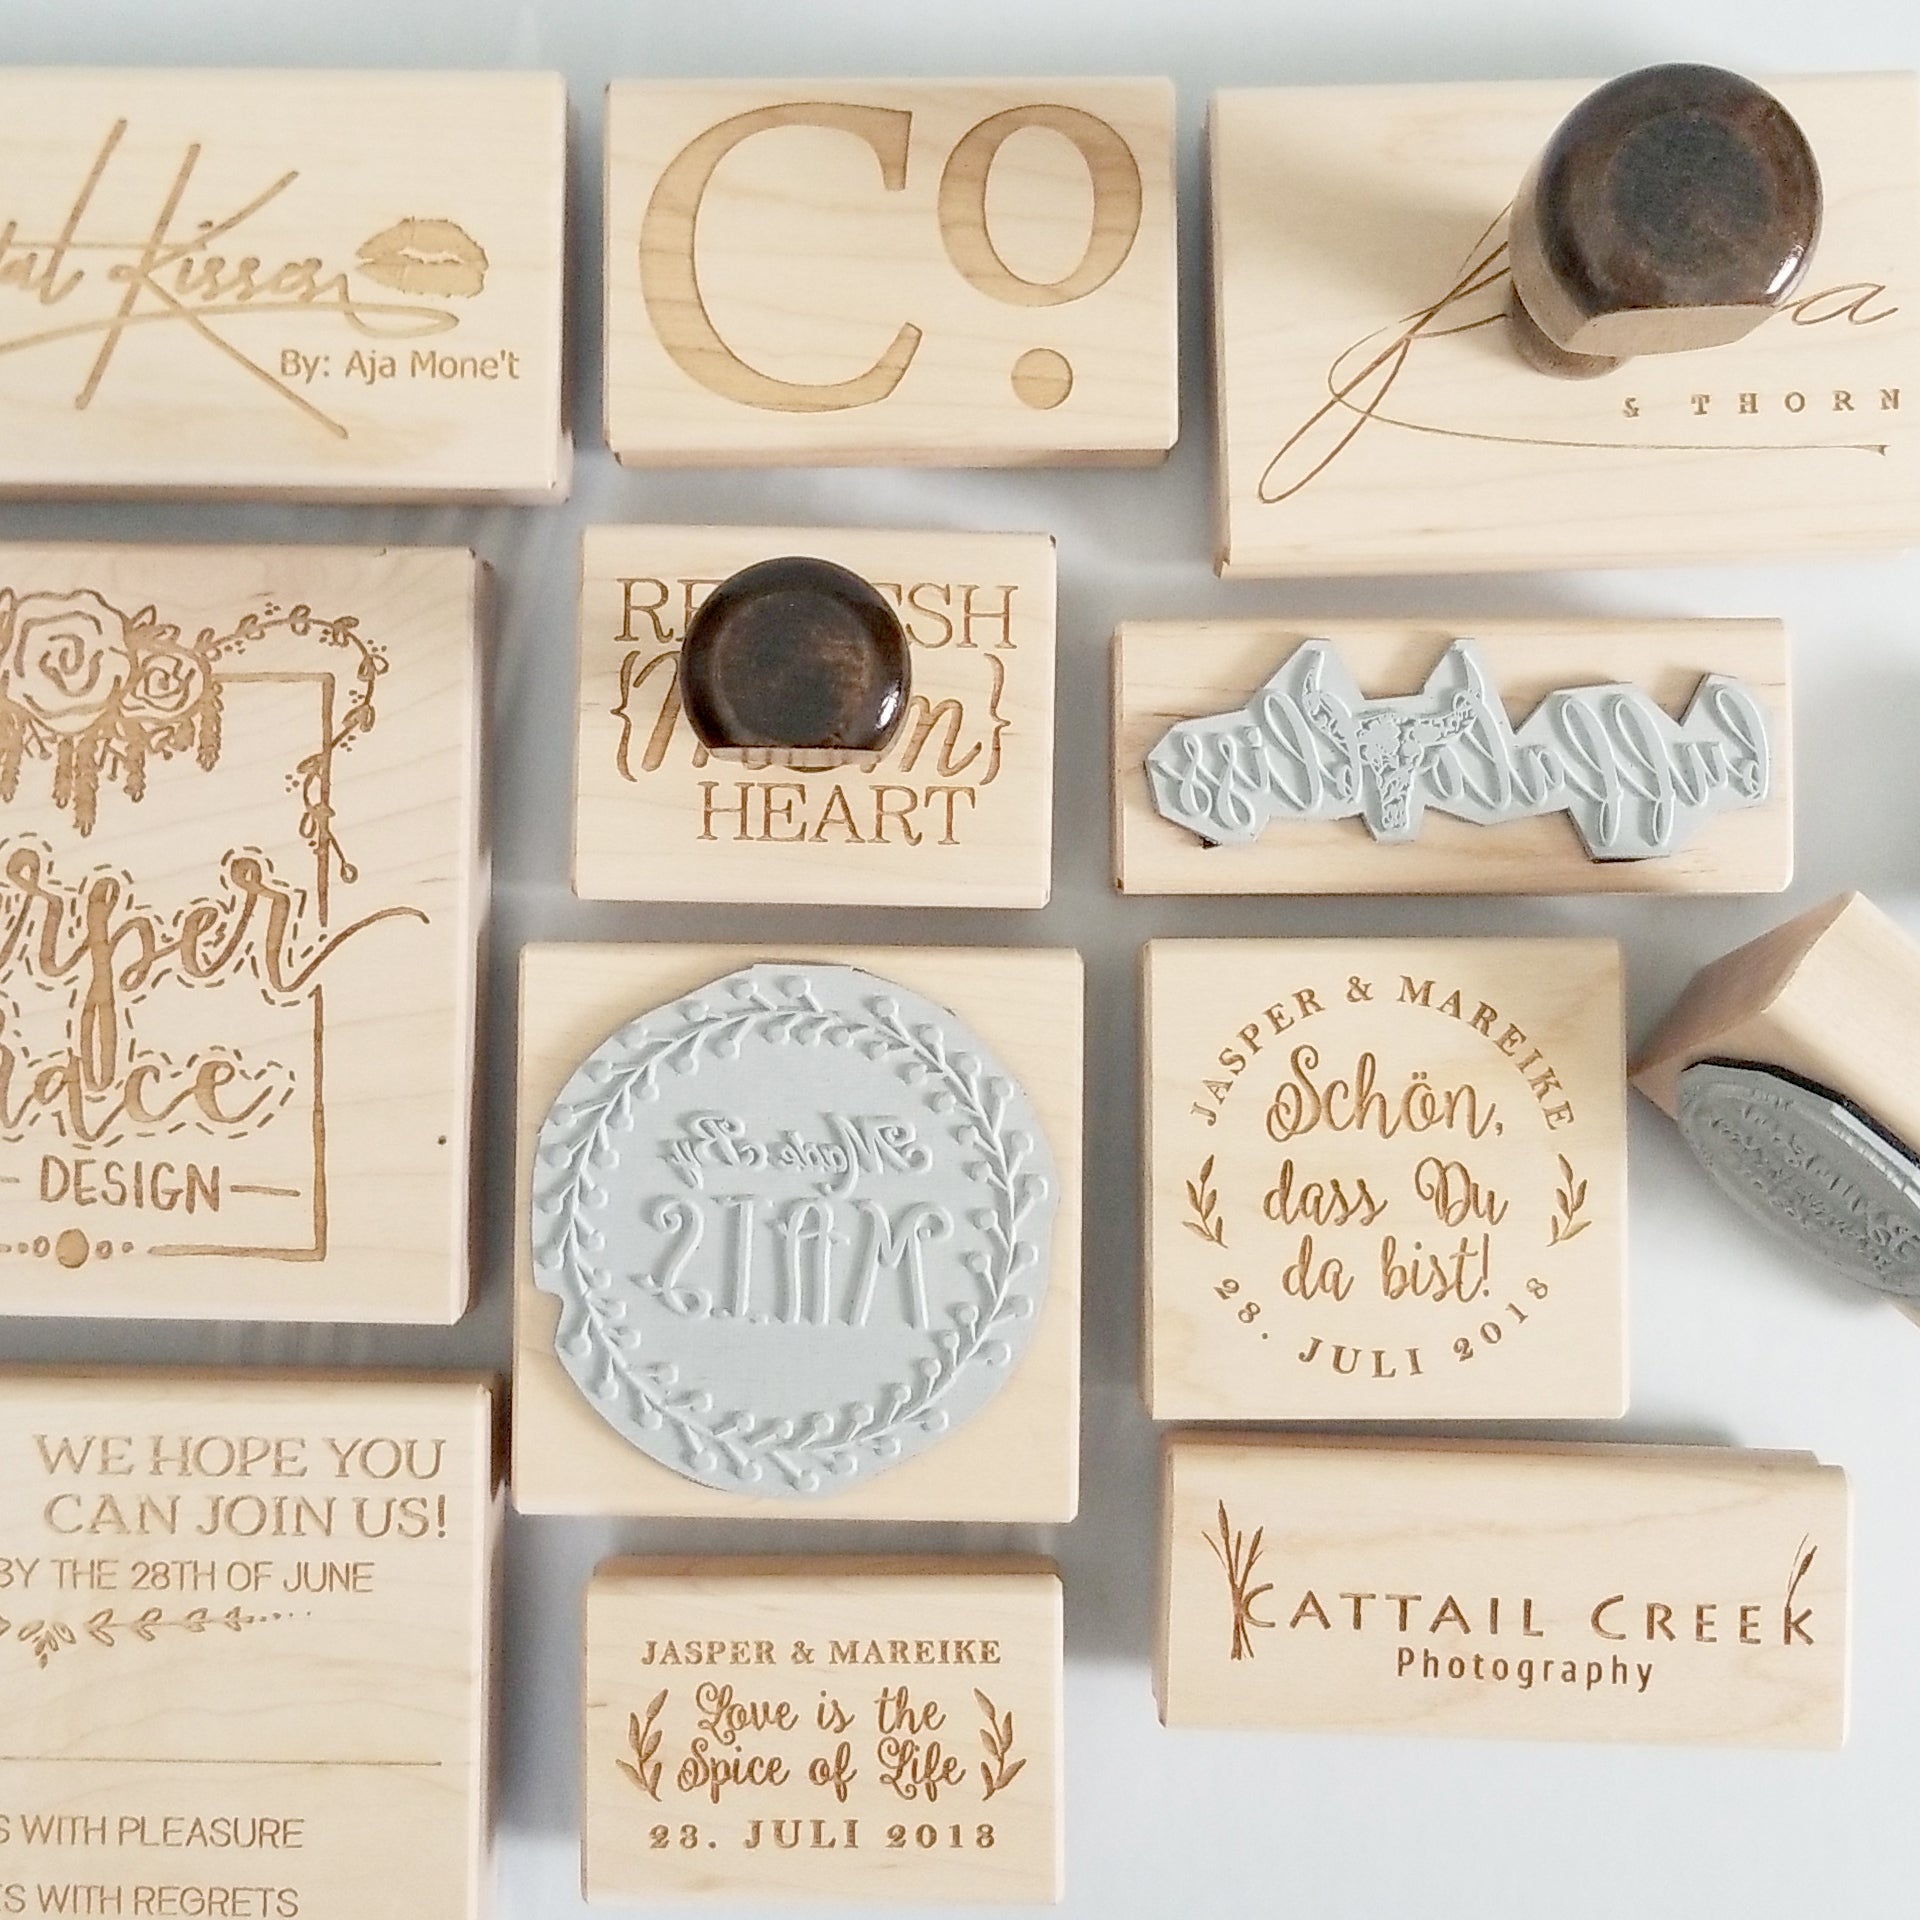 Custom Embosser from your Design – SayaBell Stamps